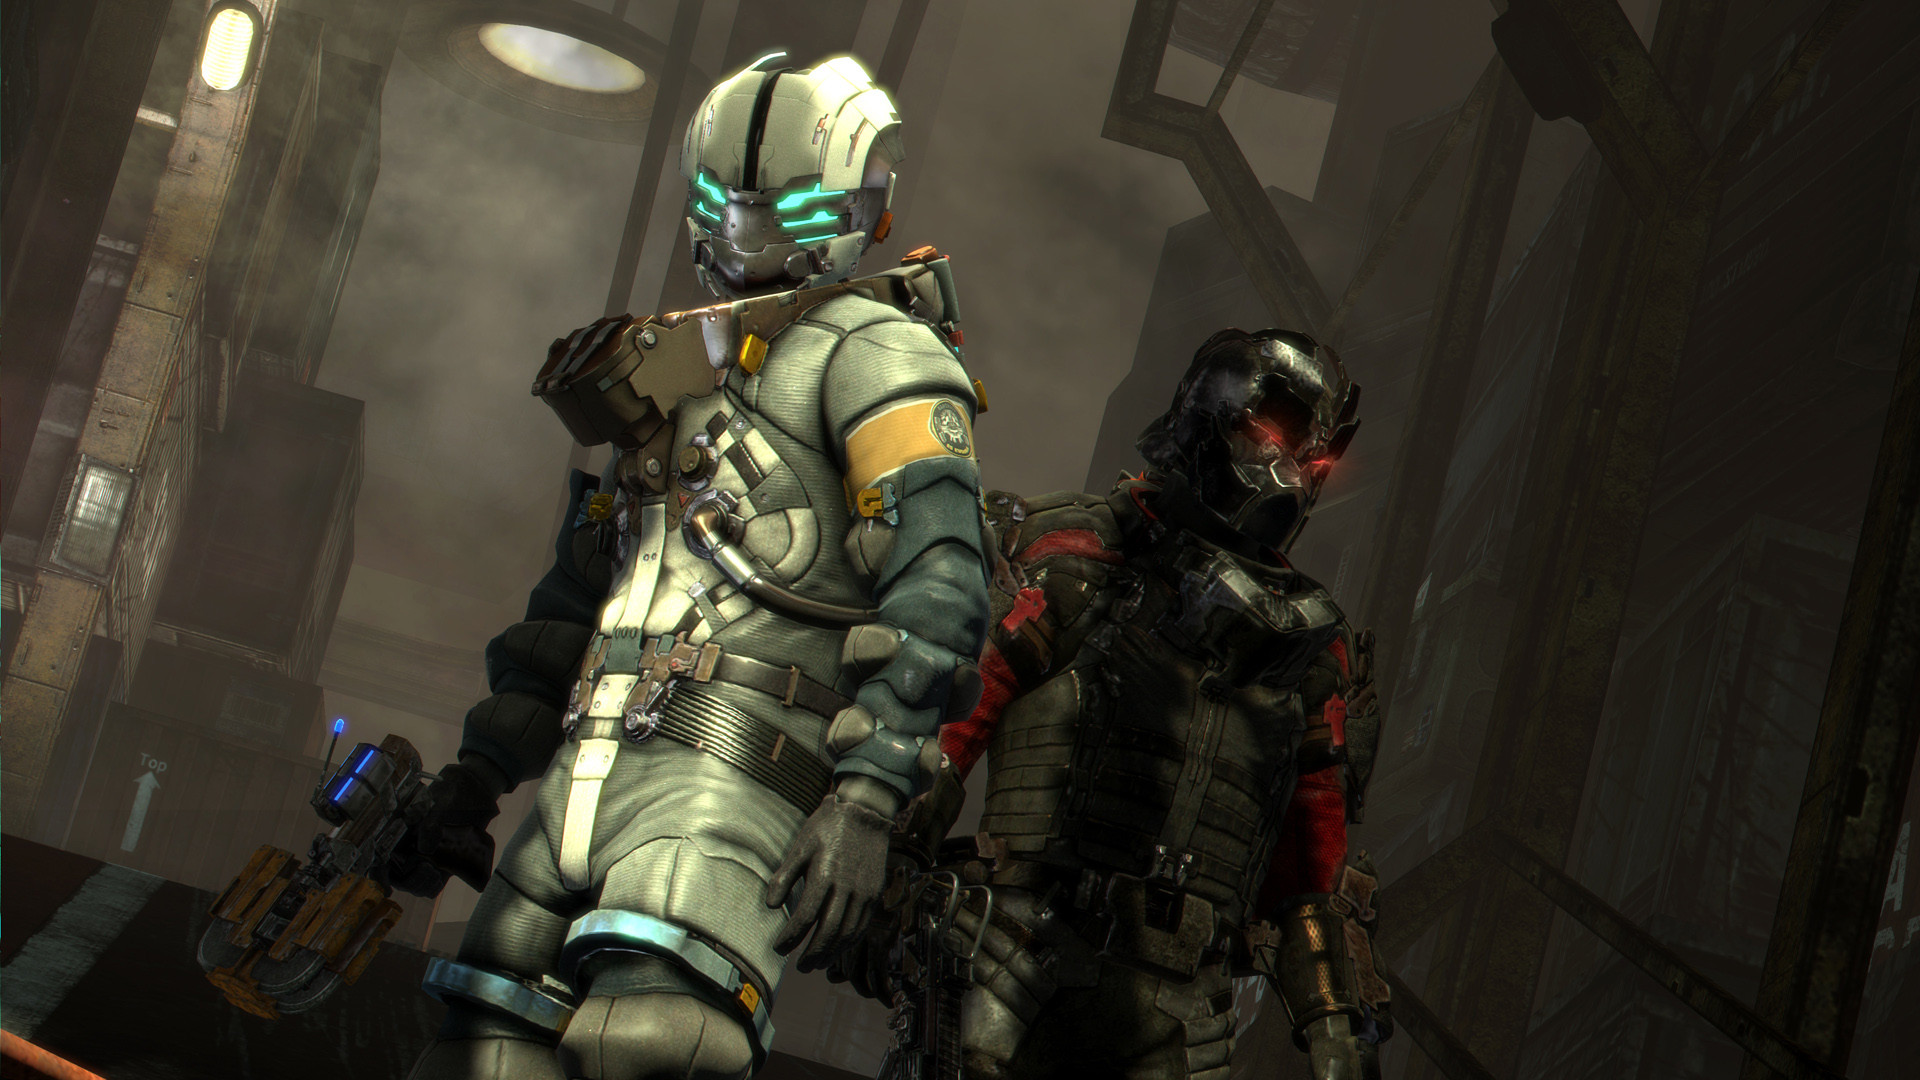 Preview: Hands On The First Three Hours of Dead Space 3